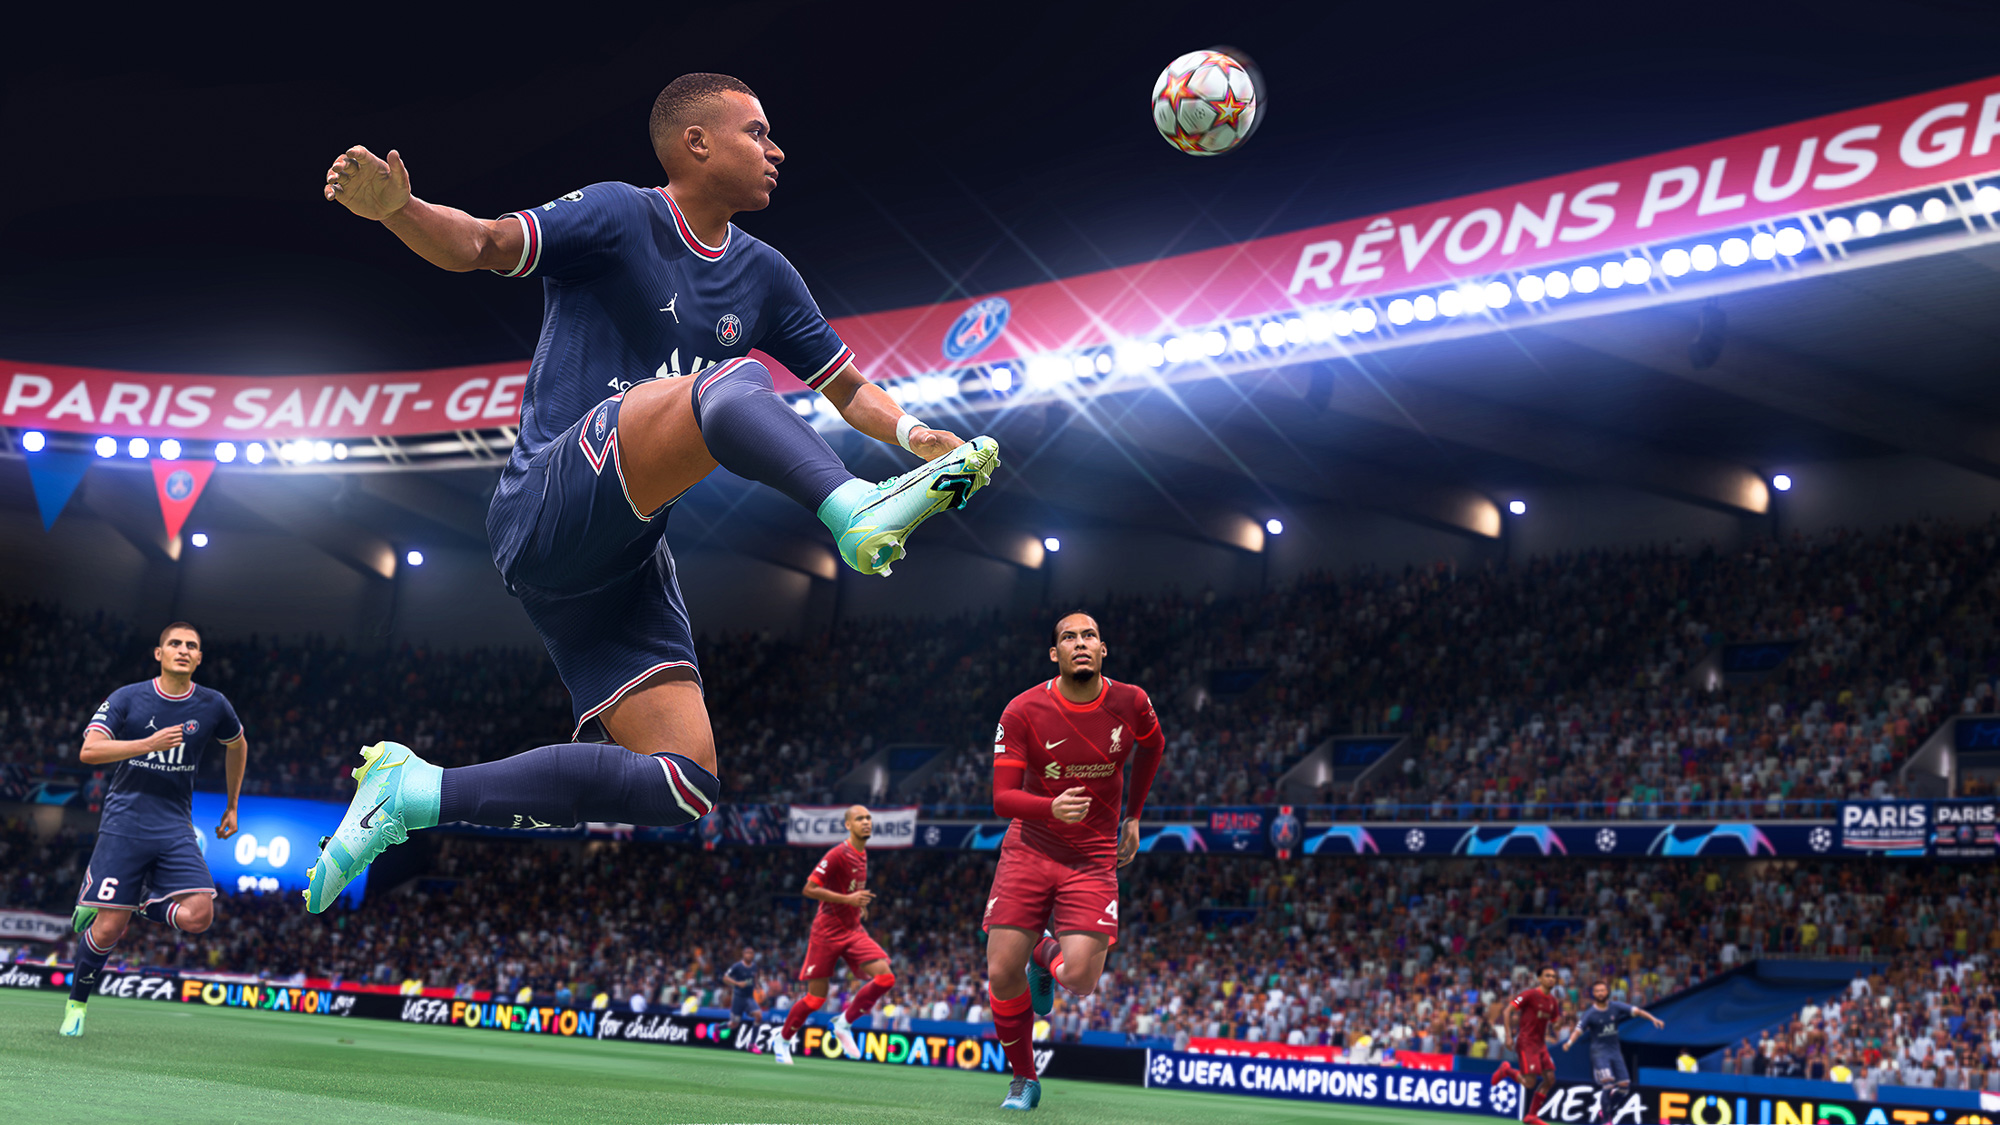 HHW Gaming: ‘FIFA 22’ Promises To Look & Feel More Realistic Thanks To New HyperMotion Technology